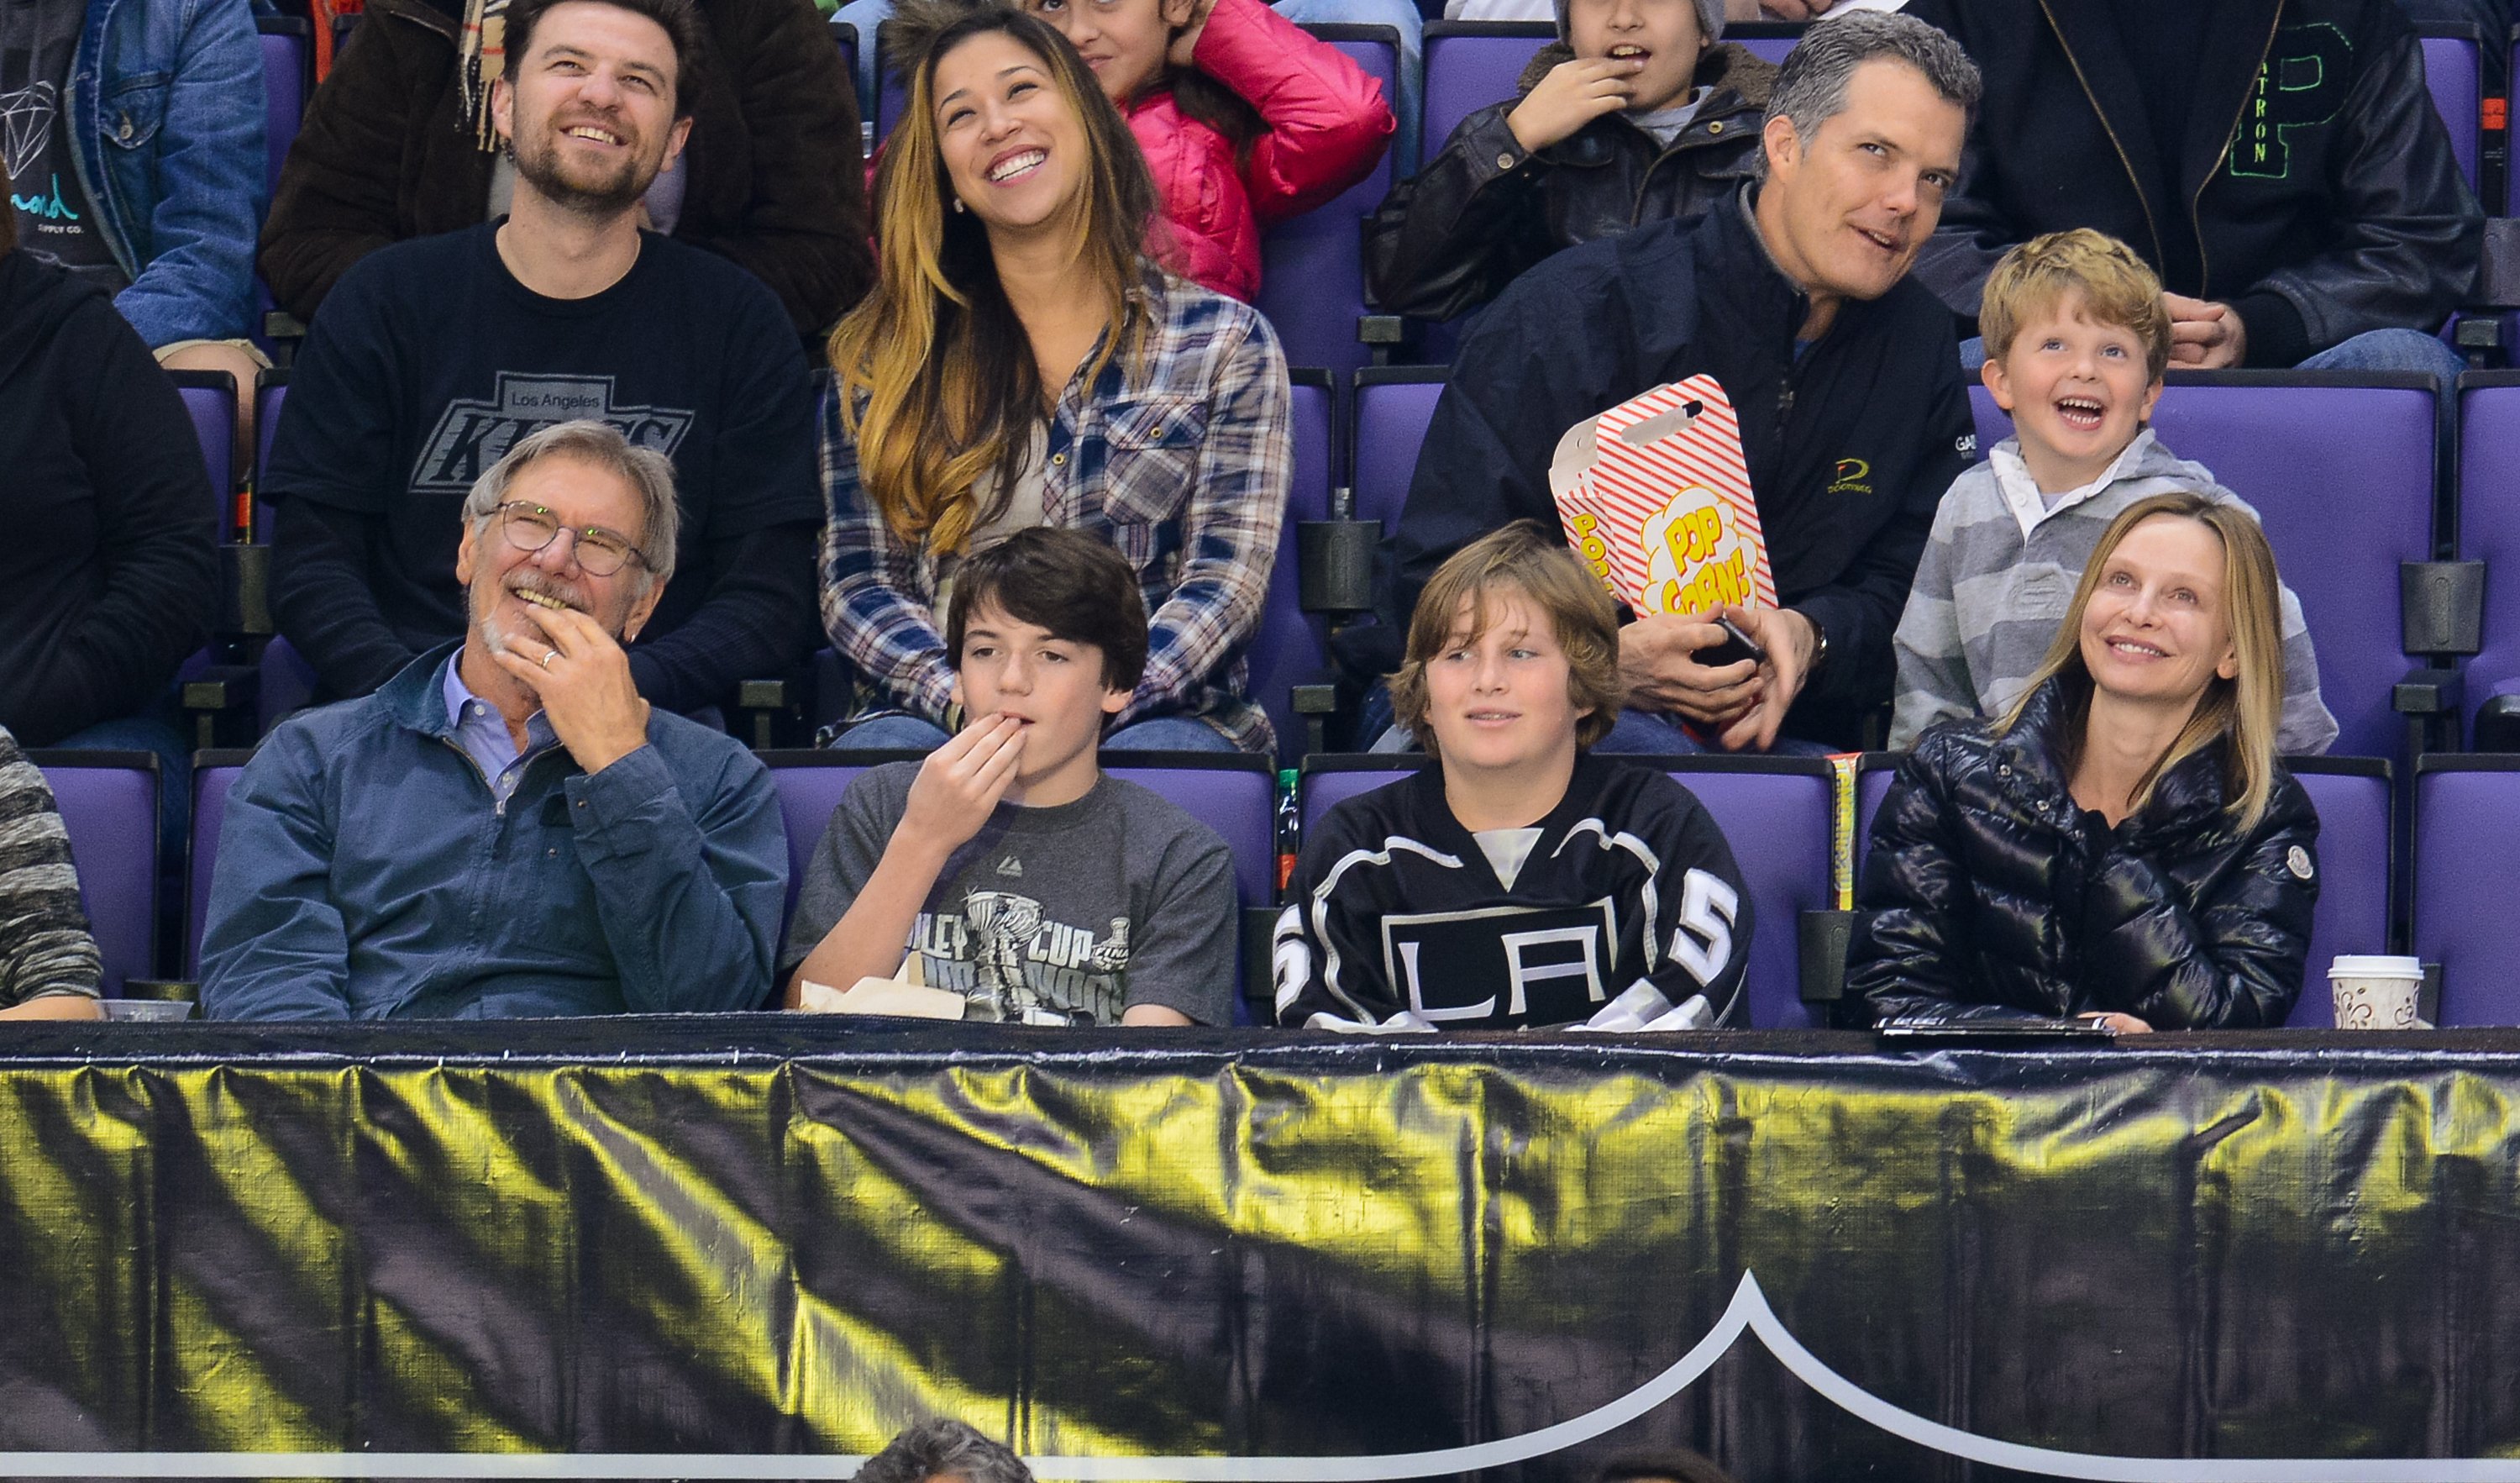 Harrison Ford, Liam Flockhart, a guest, and Calista Flockhart at a hockey game at Staples Center on March 1, 2014, in Los Angeles, California. | Source: Getty Images